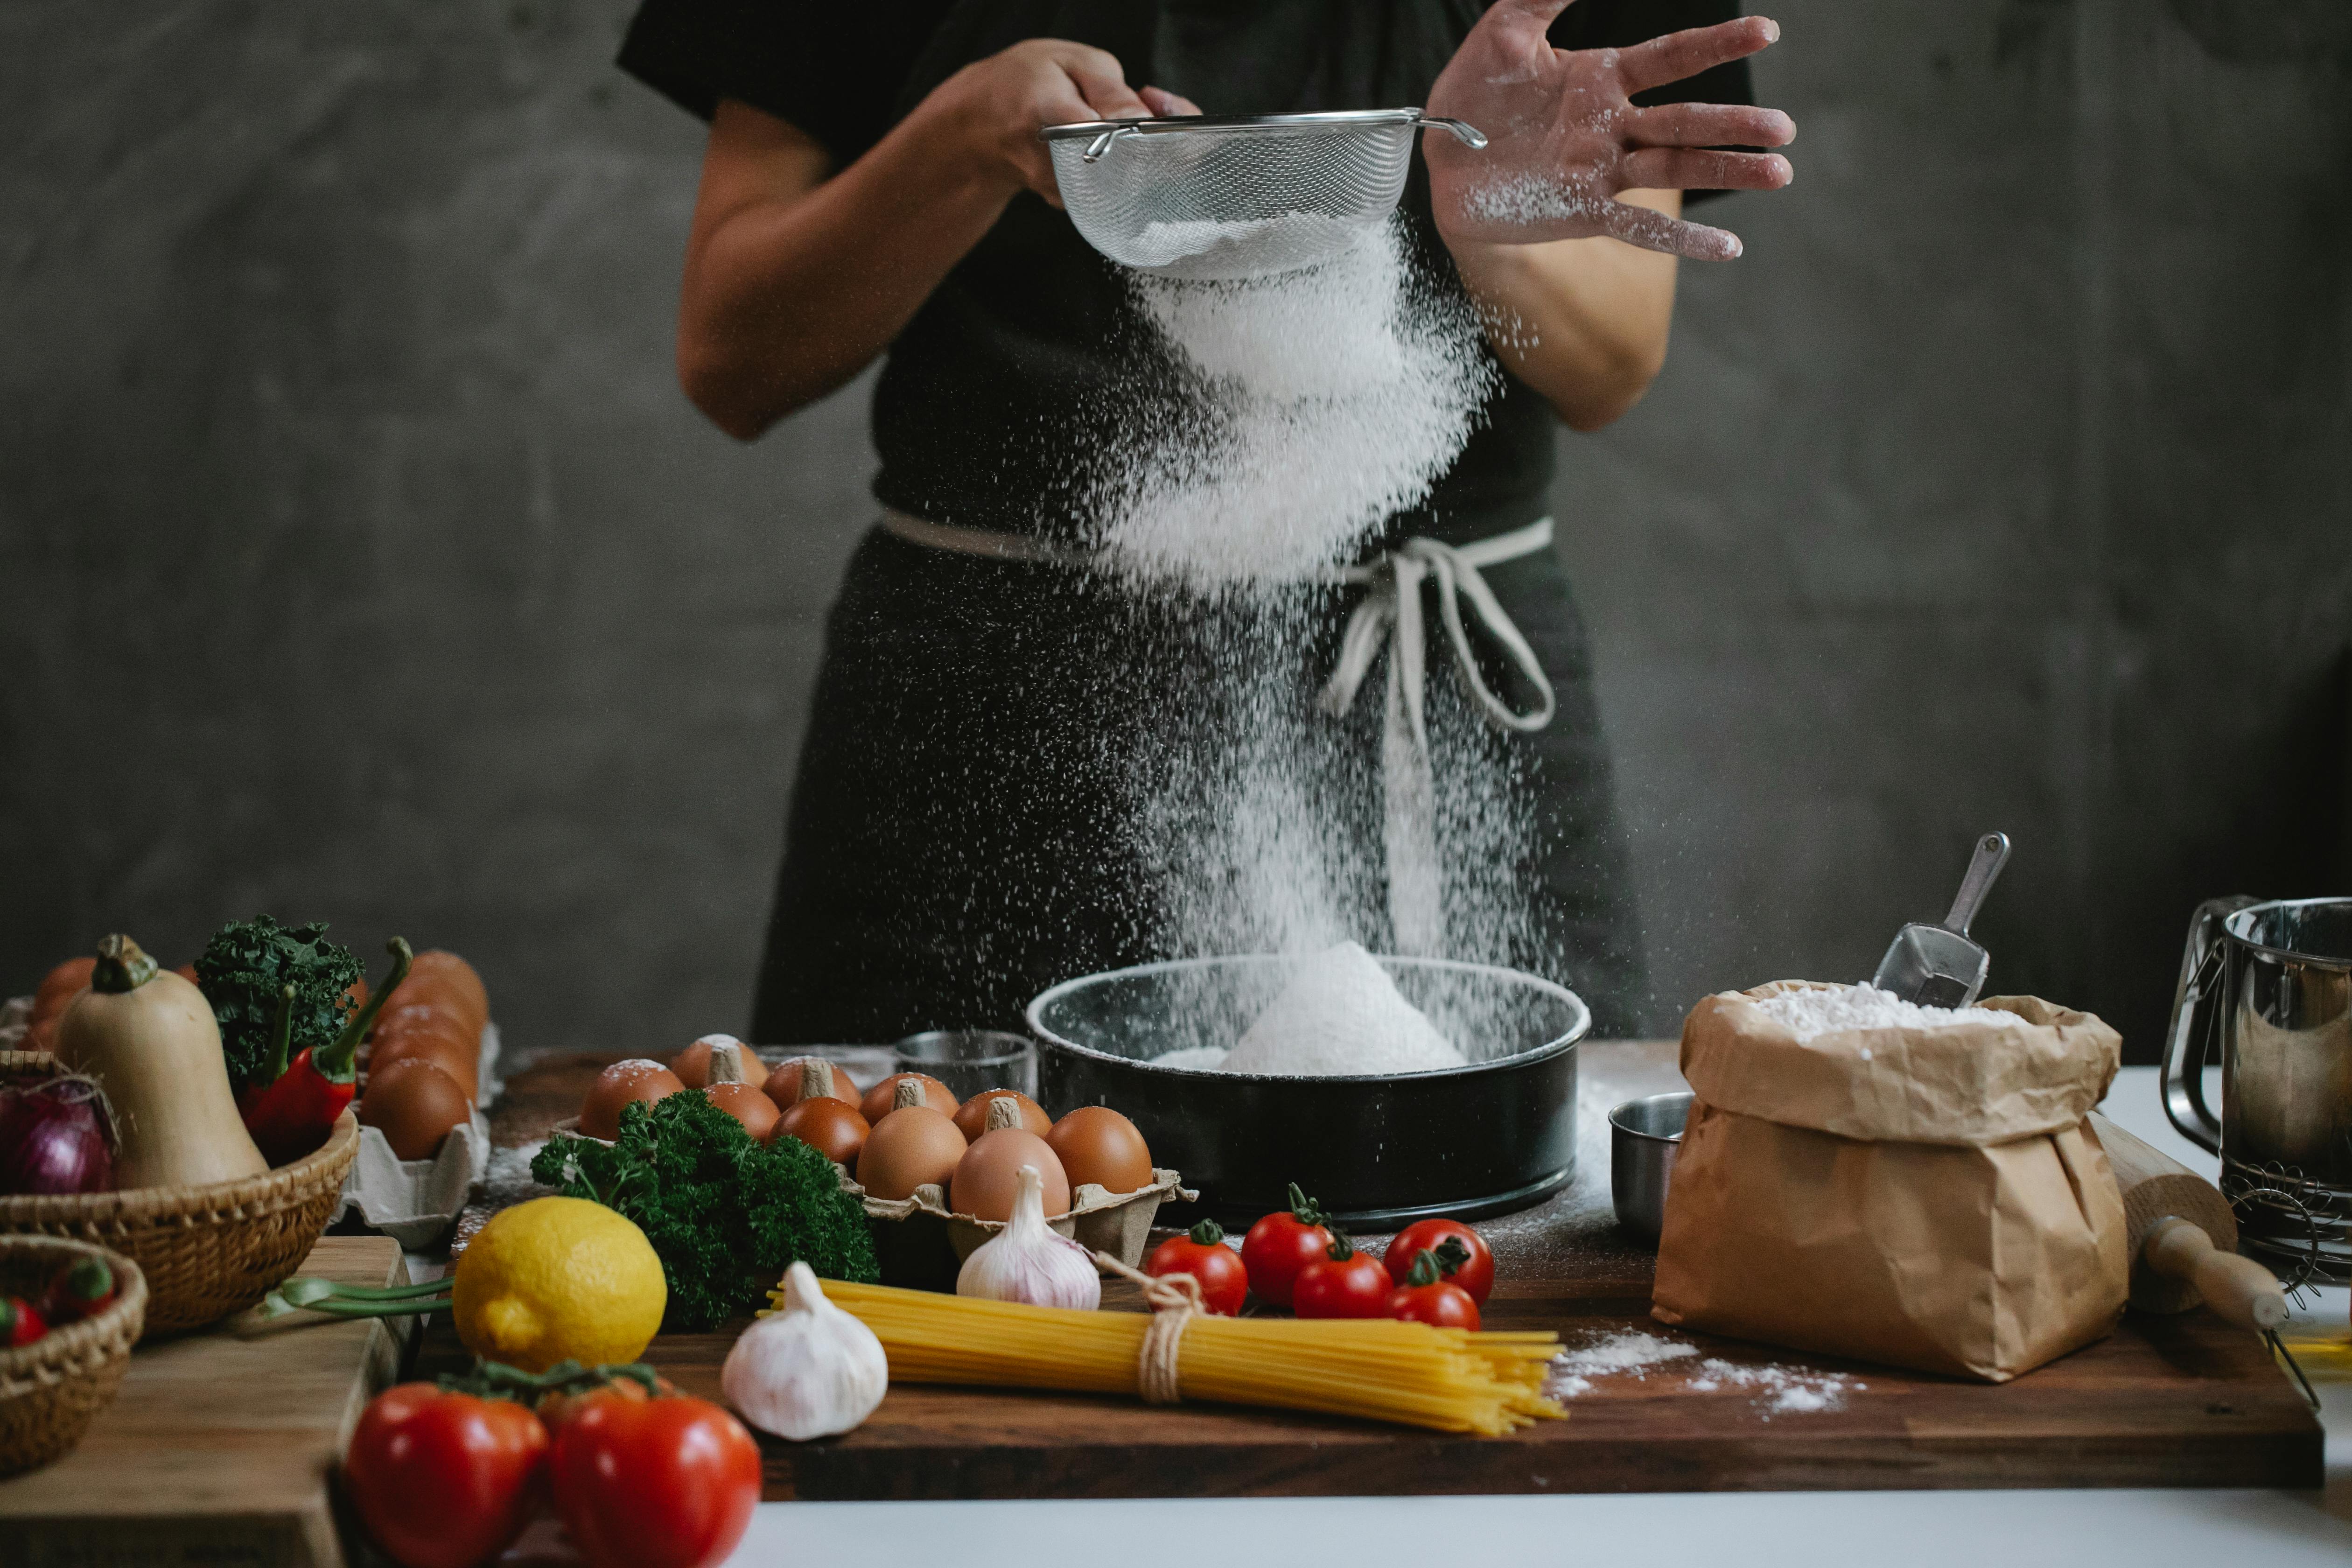 cook adding flour into baking form while preparing meal